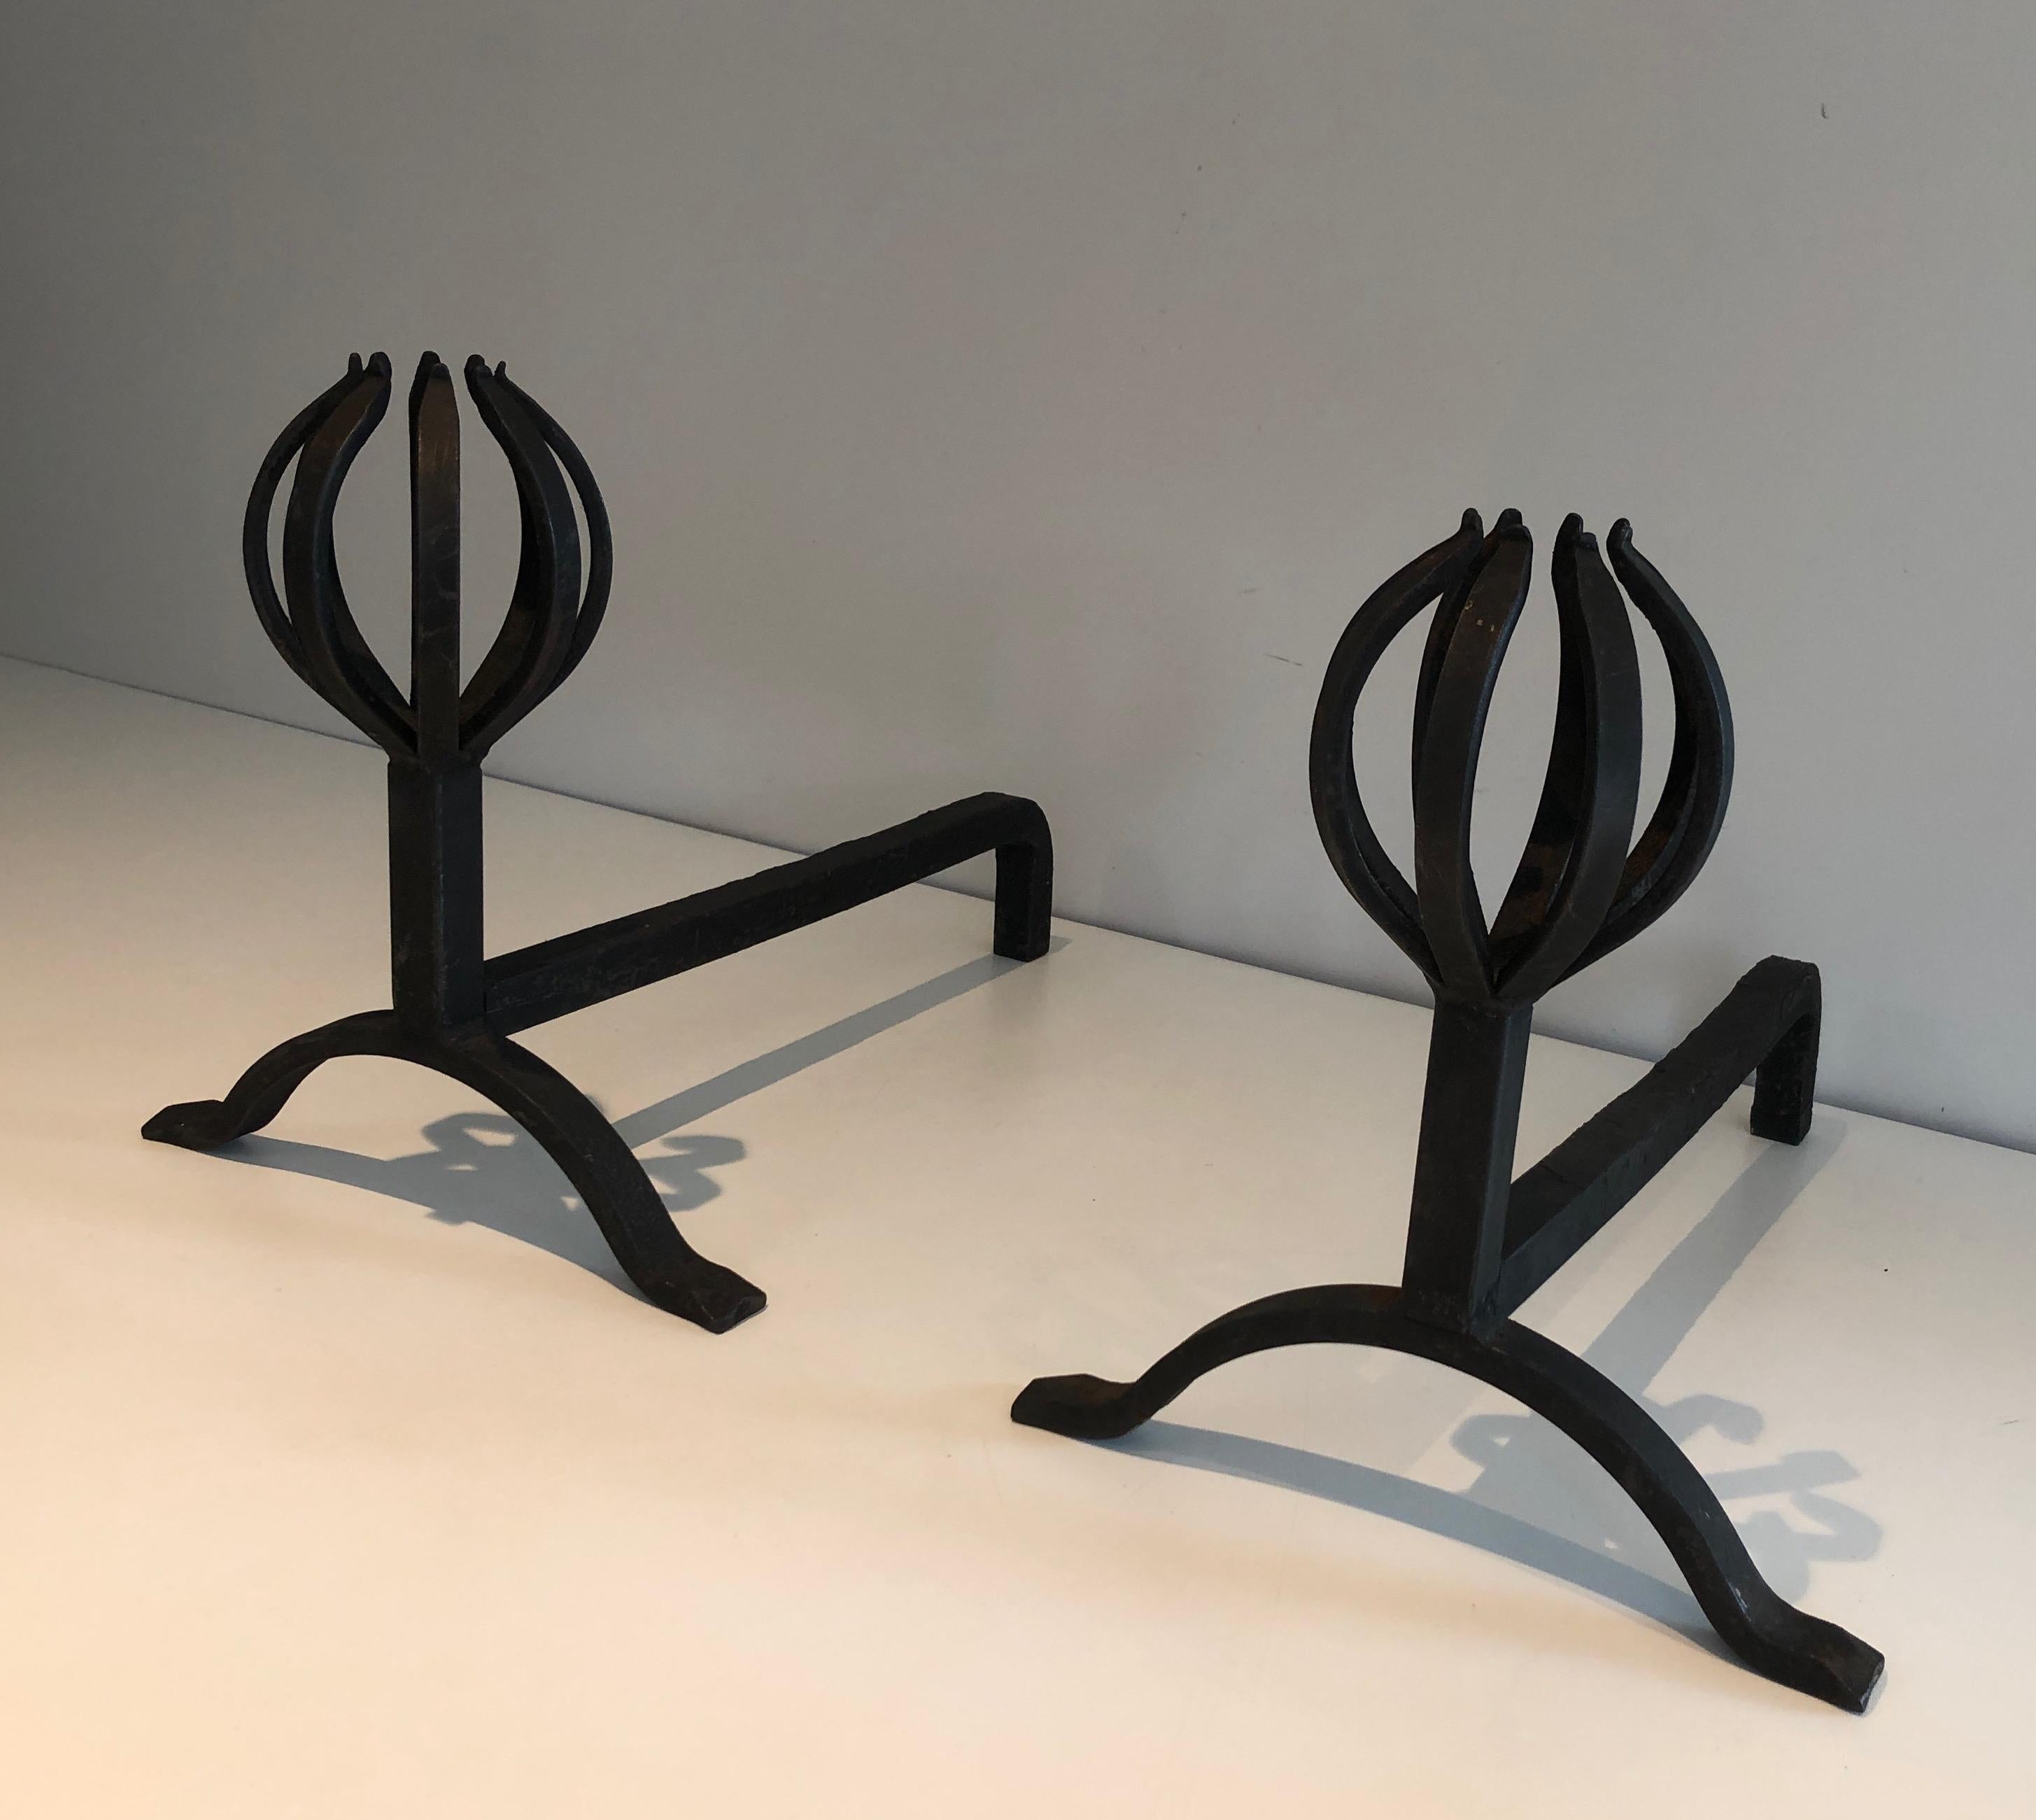 This very nice pair of andirons is made of wrought iron. This is a nice work, in the style of famous French designer Jean Royère, circa 1950.